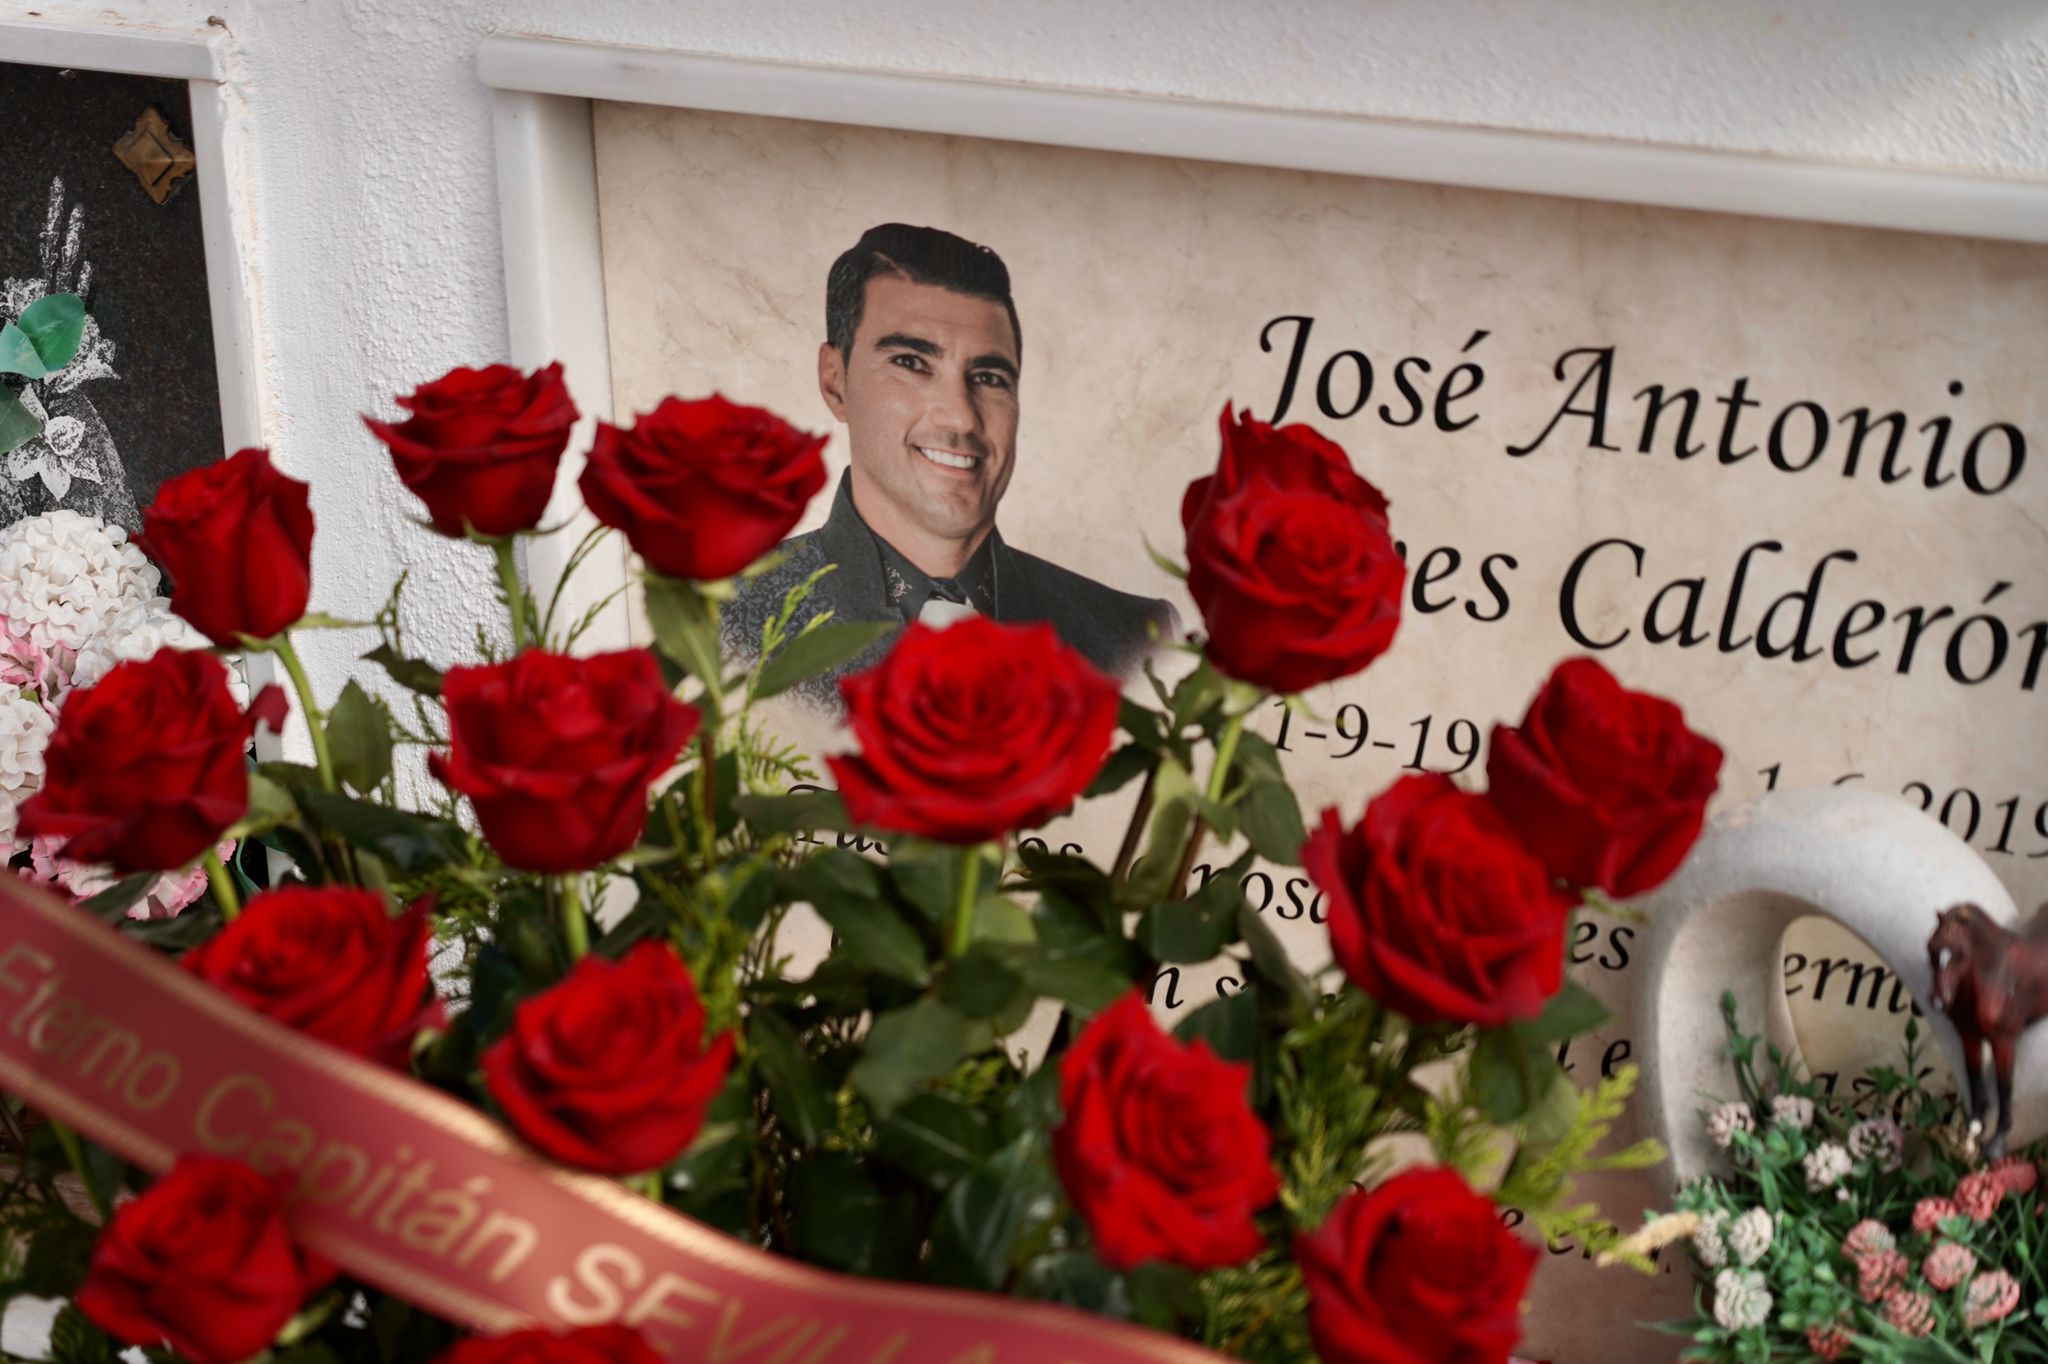 An offering at the tomb of José Antonio Reyes